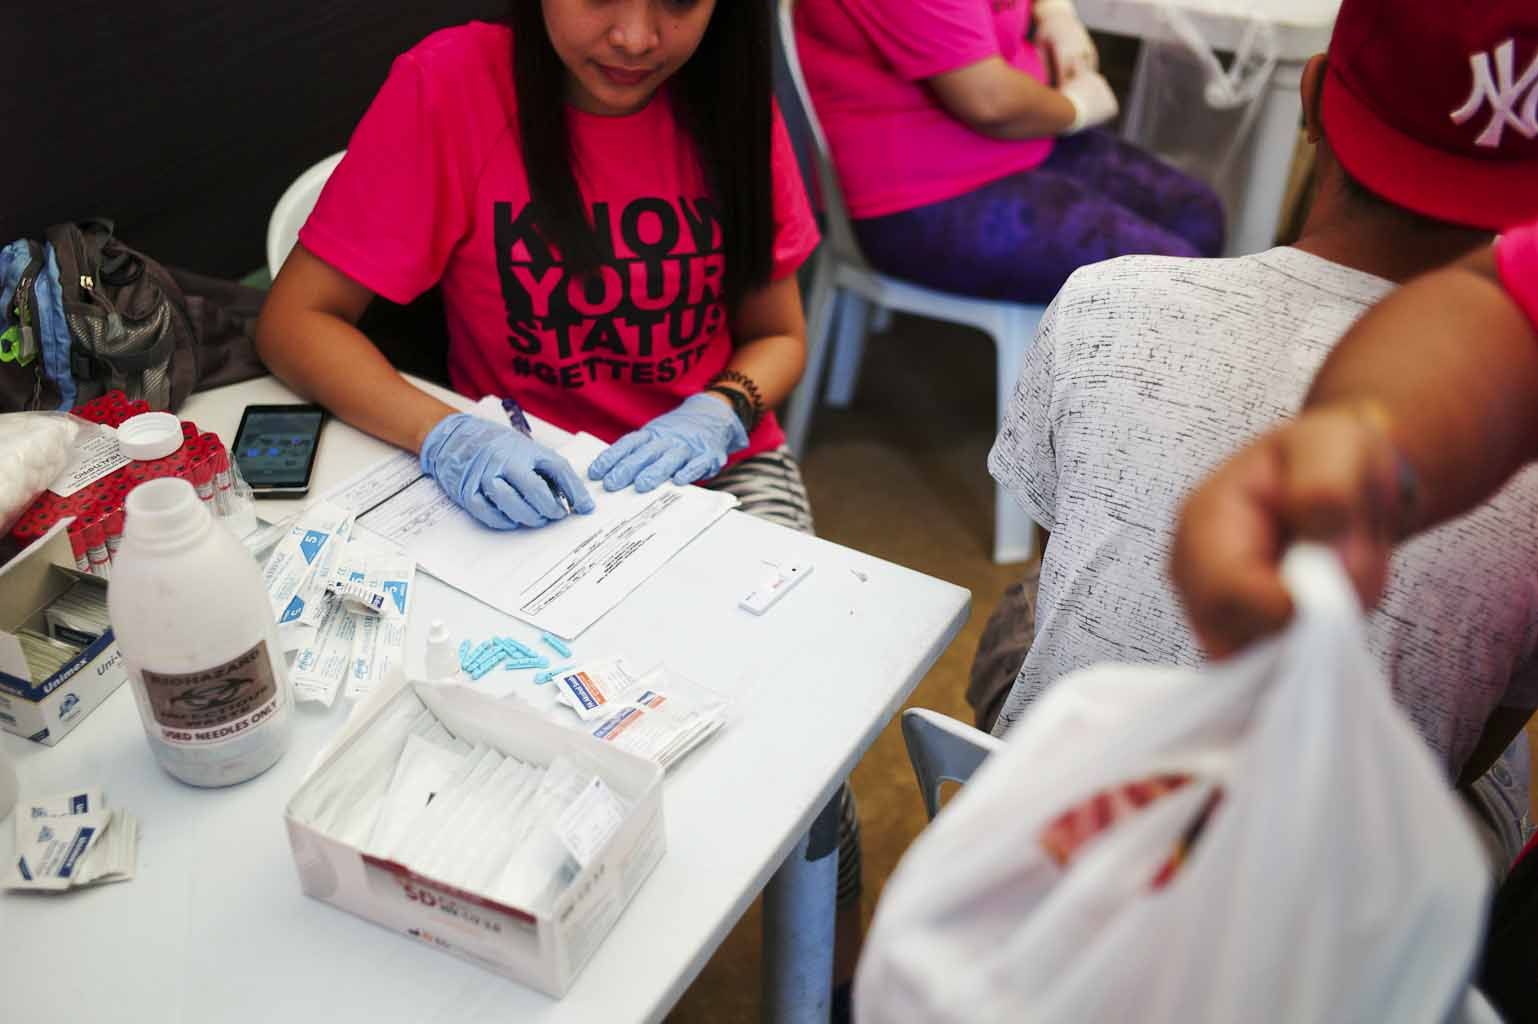 Health officials conduct rapid HIV testing during a fun run in Cebu City. Image by Veejay Villafranca. Philippines, 2015.